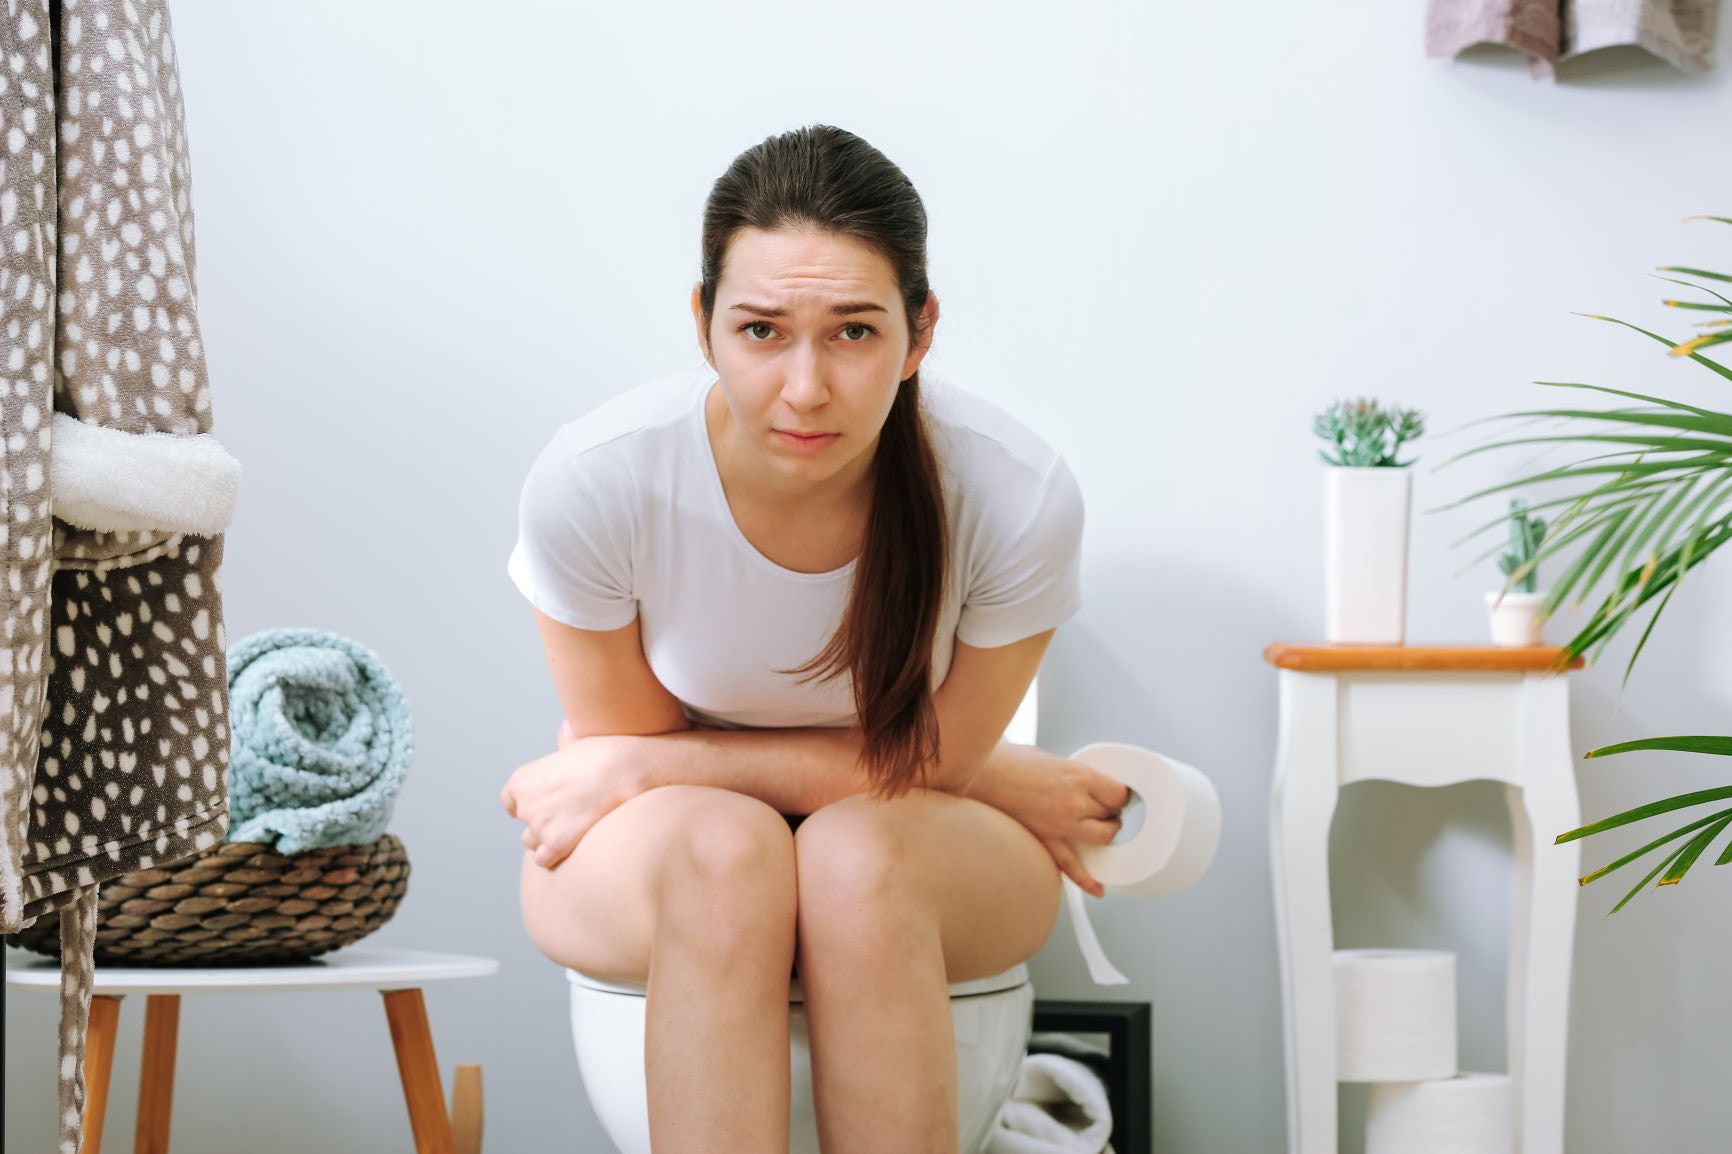 How to Use Baking Soda for Constipation Relief